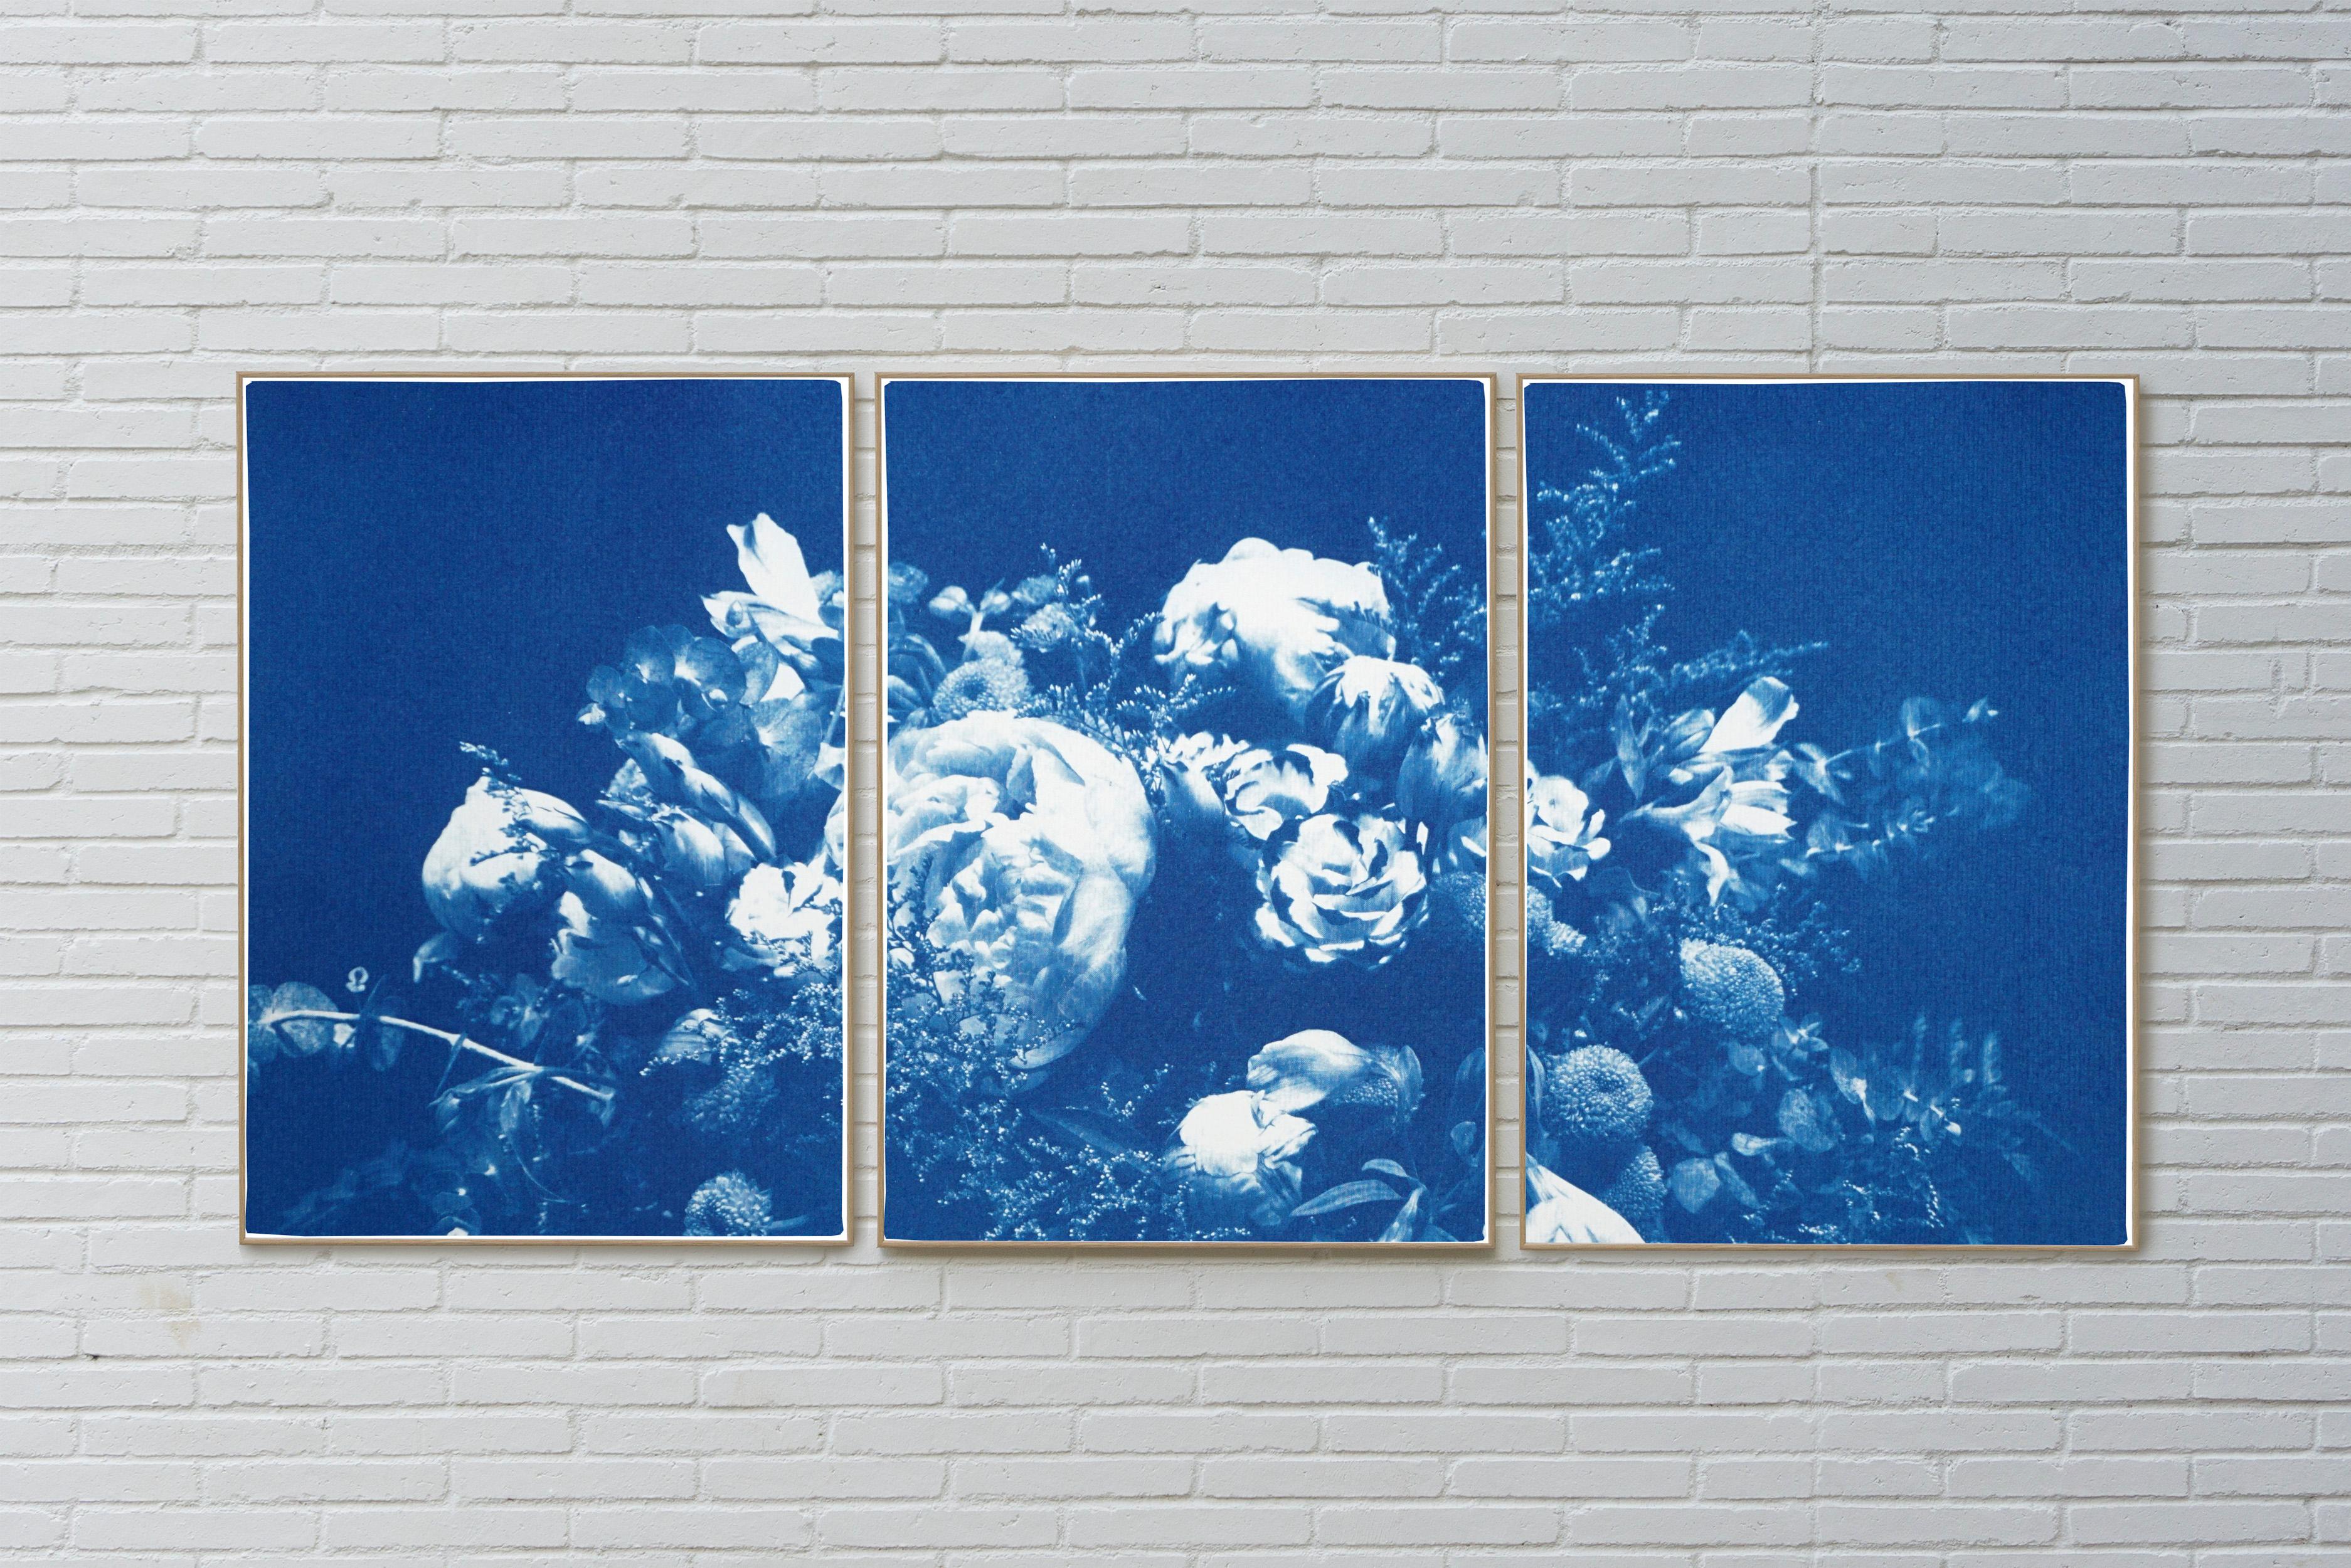 This series of cyanotype triptychs showcases the beauty of nature scenes, including stunning beaches and oceans, as well as the intricate textures of water, forests, and skies. These triptychs are large pieces that feature lush blues, making them an